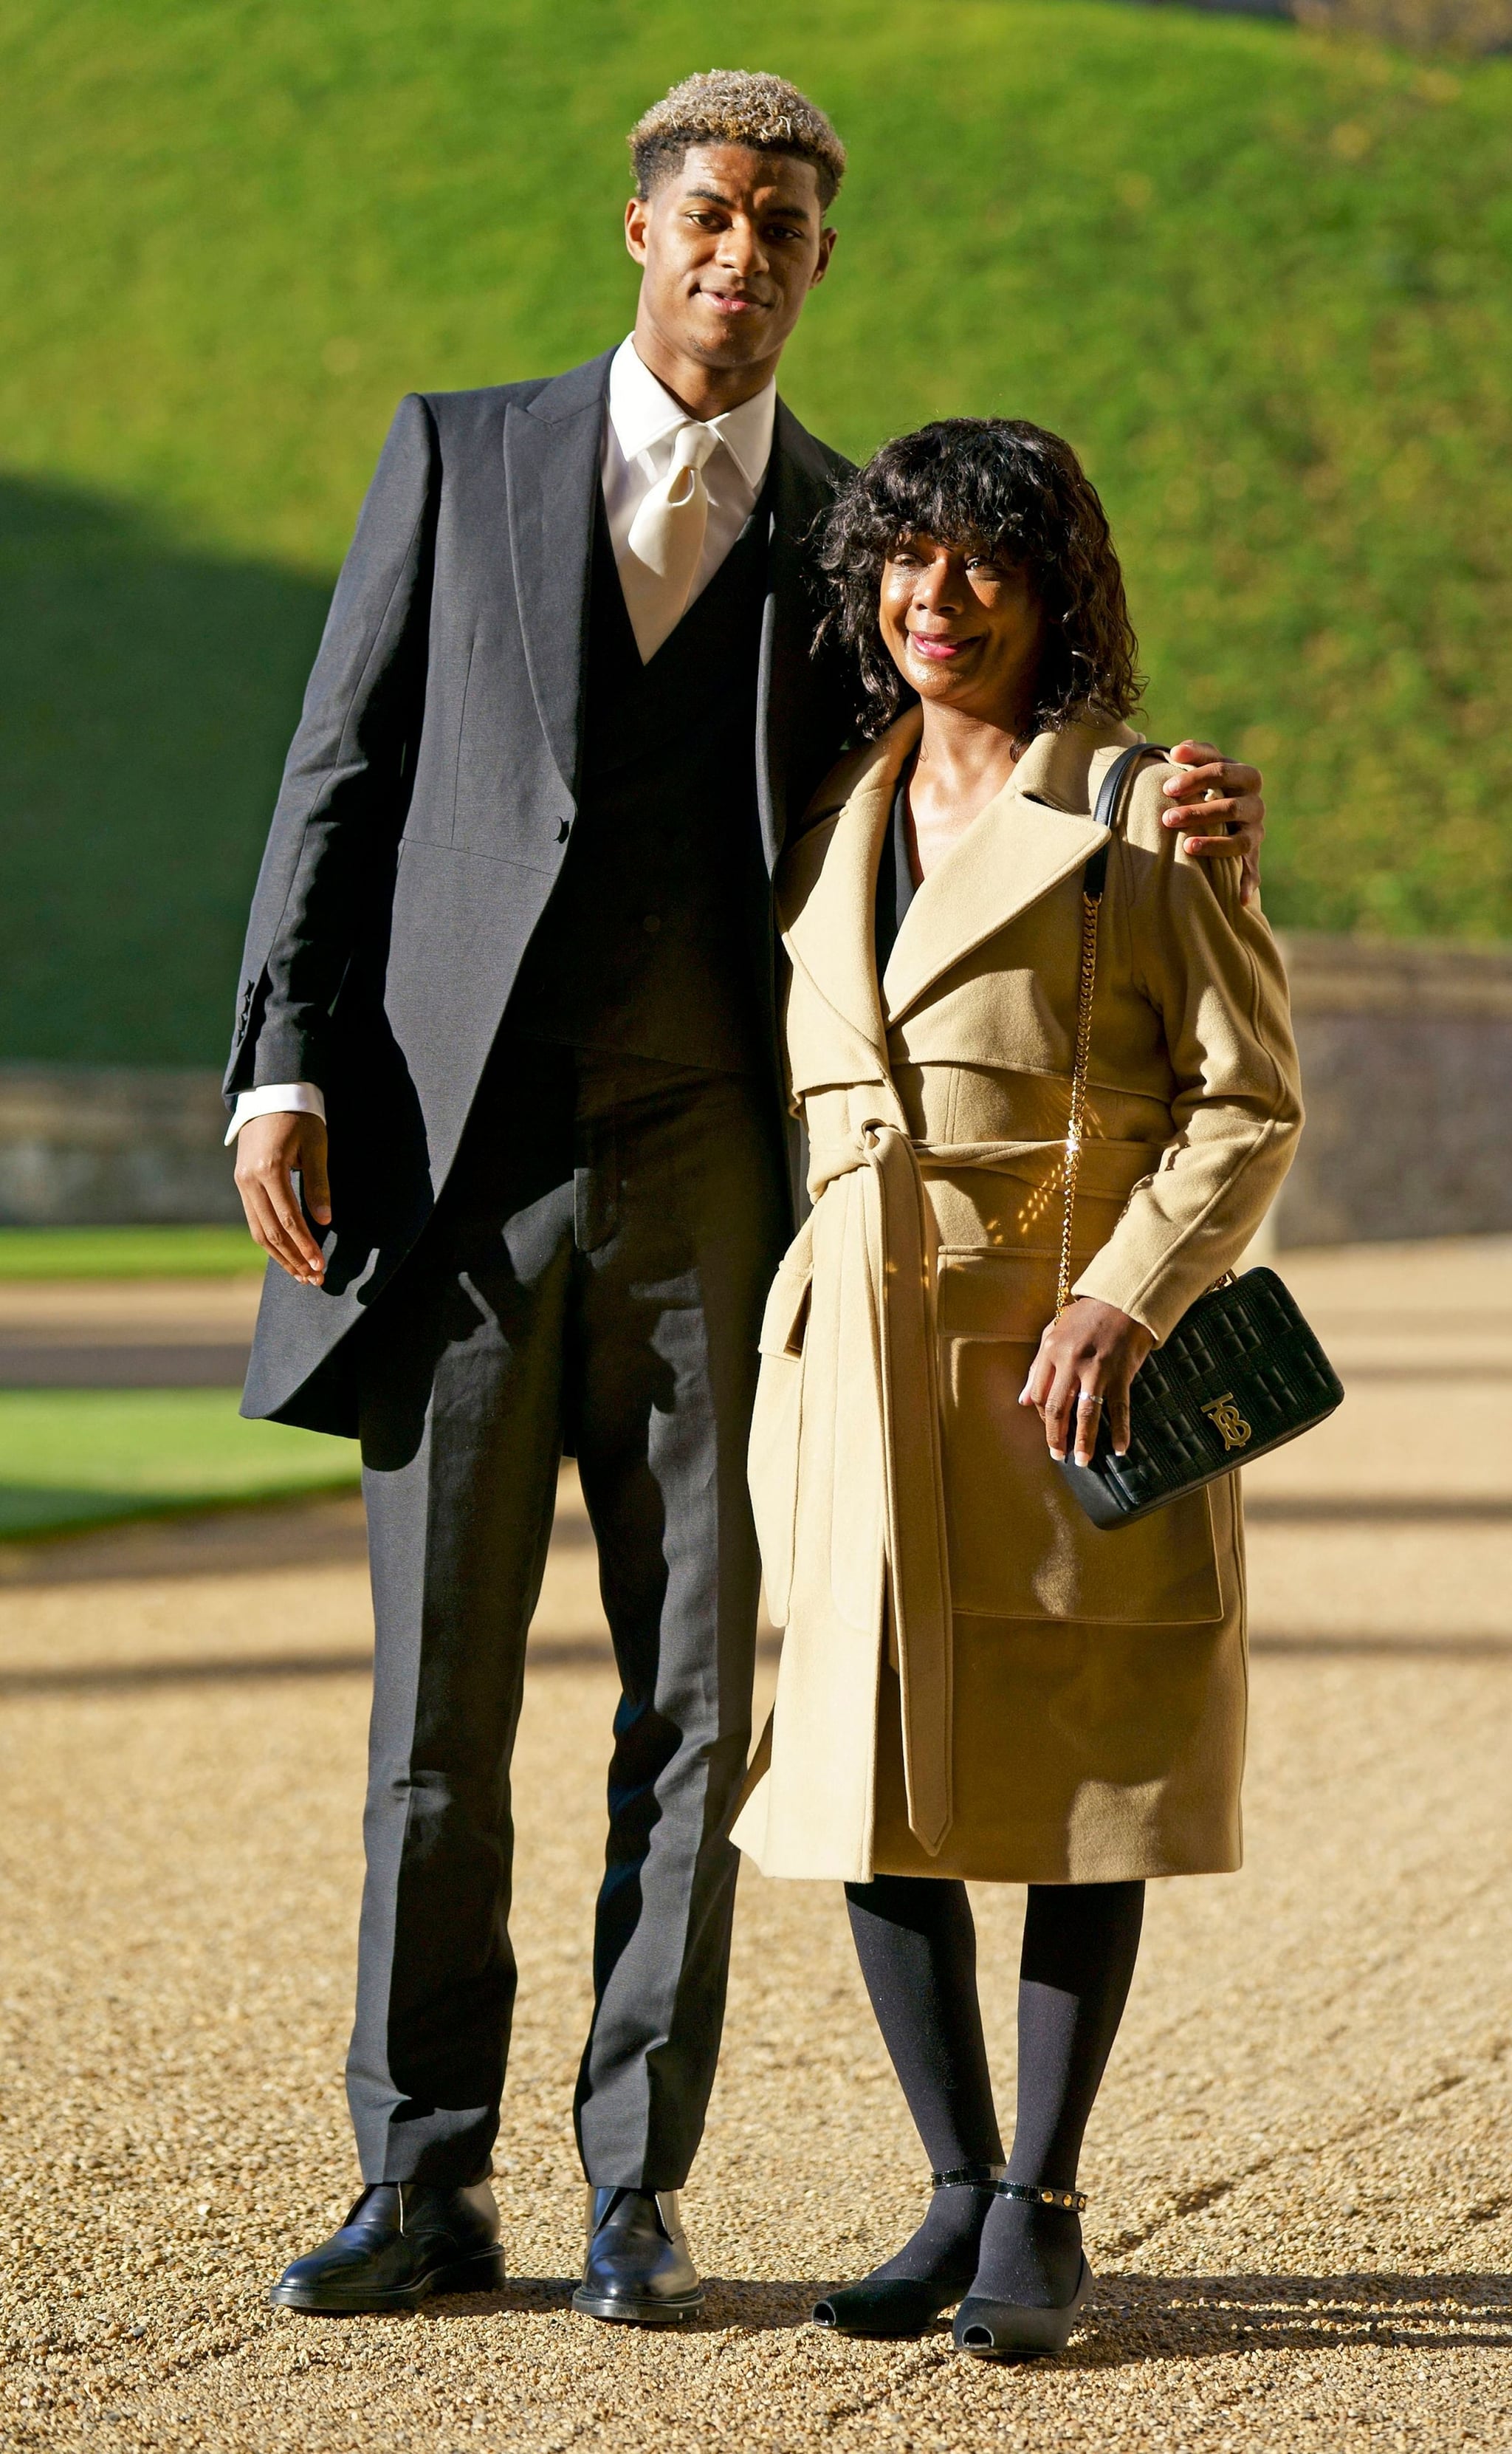 Manchester United and England footballer Marcus Rashford poses his mother Melanie Rashford before being appointed a Member of the Order of the British Empire (MBE) for services to Vulnerable Children in the UK during the Covid-19 pandemic, at an investiture ceremony at Windsor Castle in Windsor, west of London on November 9, 2021. (Photo by Andrew Matthews / POOL / AFP) (Photo by ANDREW MATTHEWS/POOL/AFP via Getty Images)